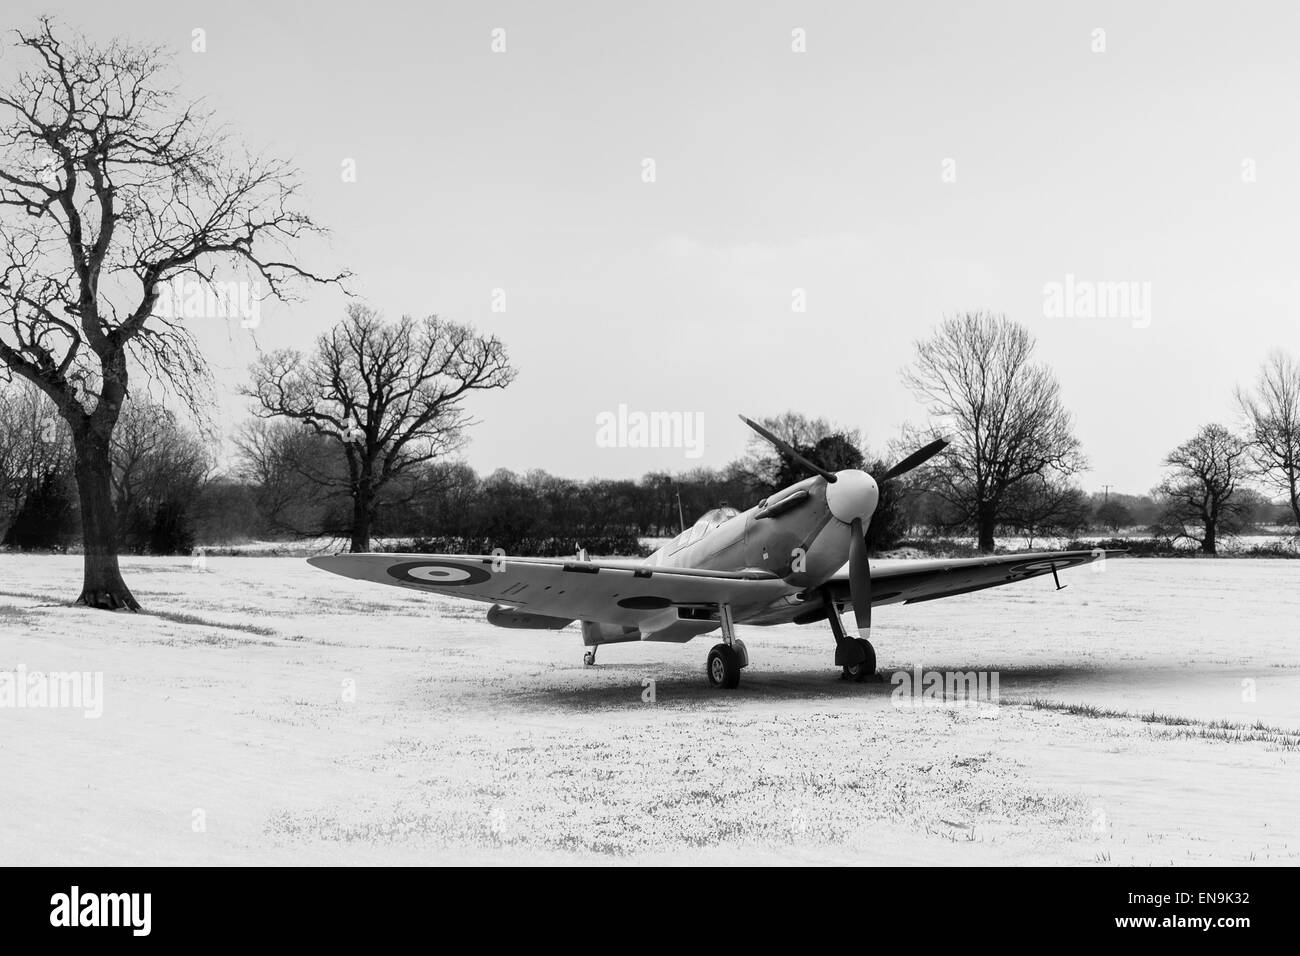 RAF Supermarine Spitfire at rest in a snowy field in the winter of 1940/41. Black and white version of this image. Stock Photo